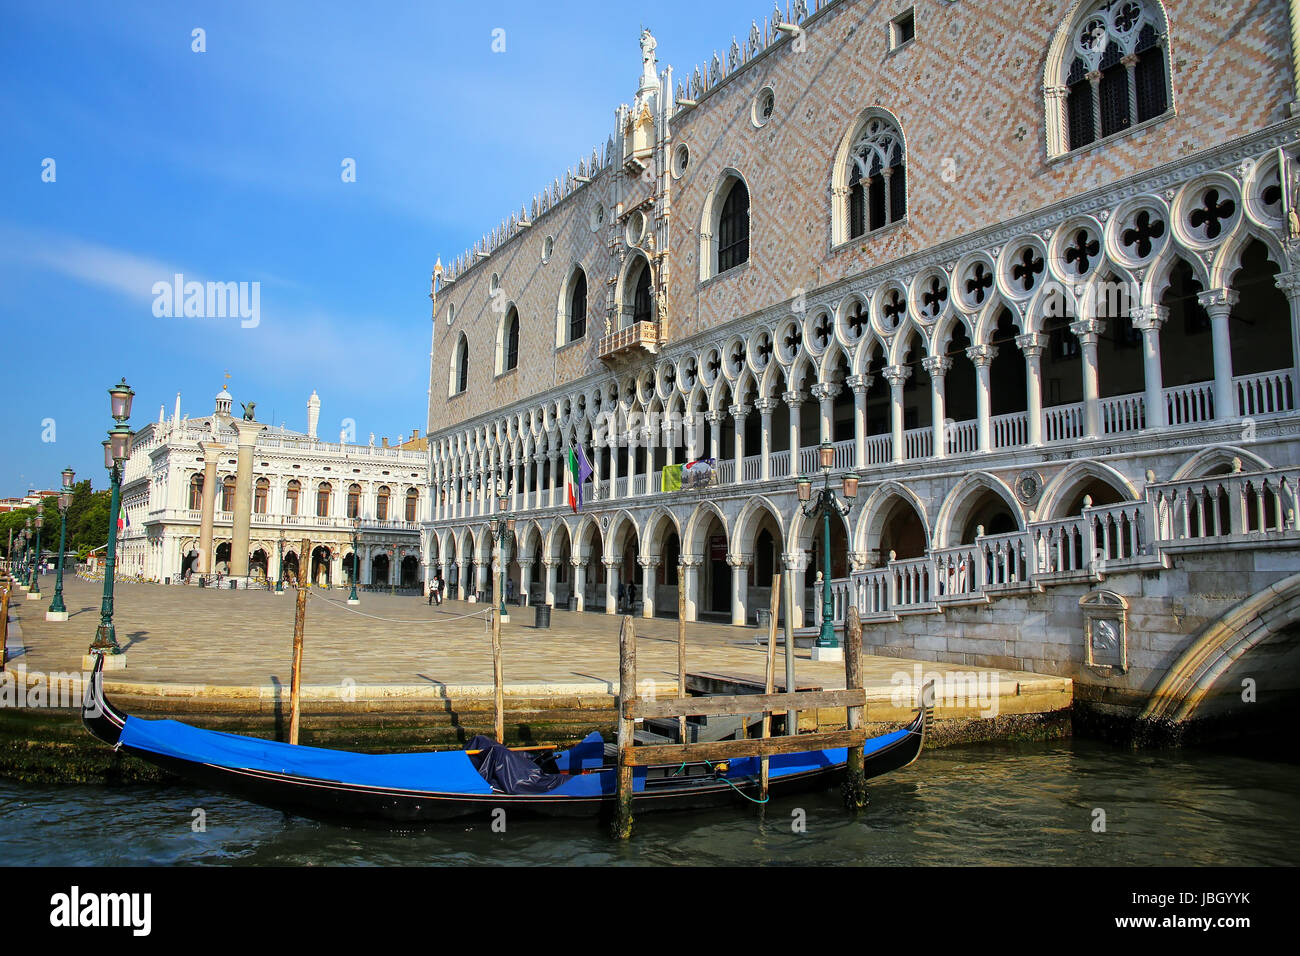 View of Palazzo Ducale from Grand Canal in Venice, Italy. The palace was the residence of the Doge of Venice. Stock Photo